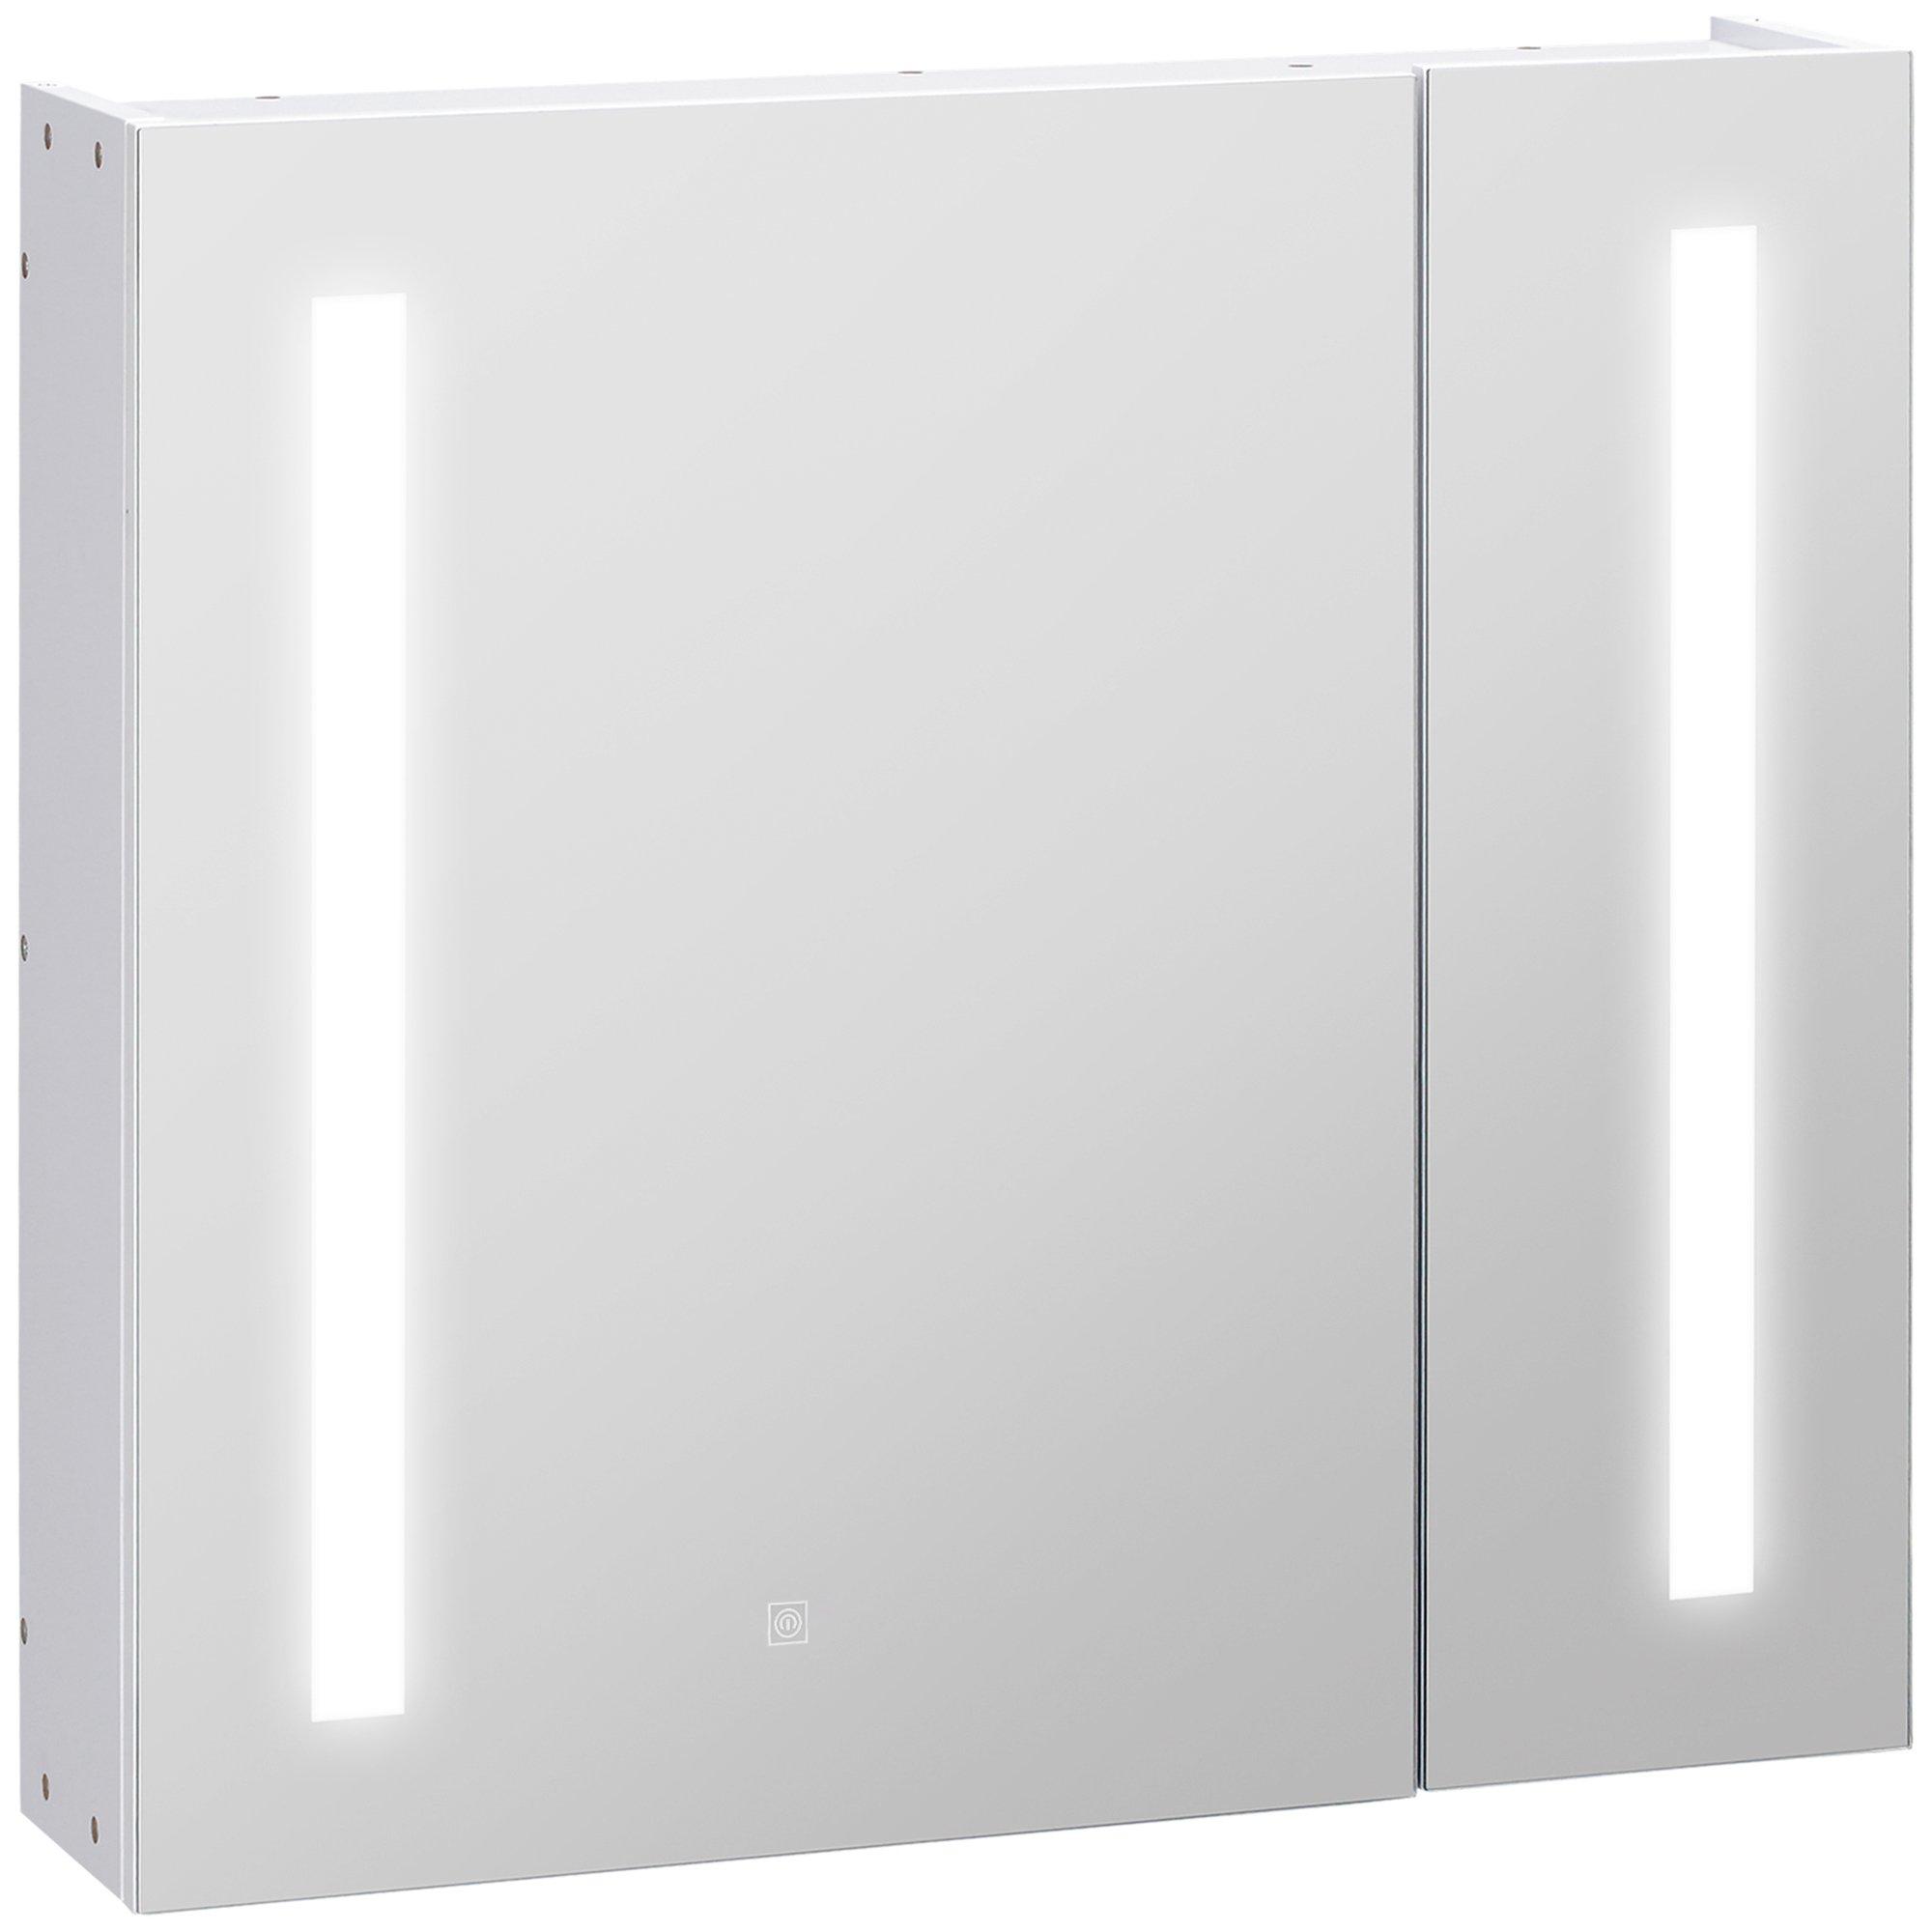 LED Illuminated Bathroom Mirror Cabinet with Lights Touch Switch